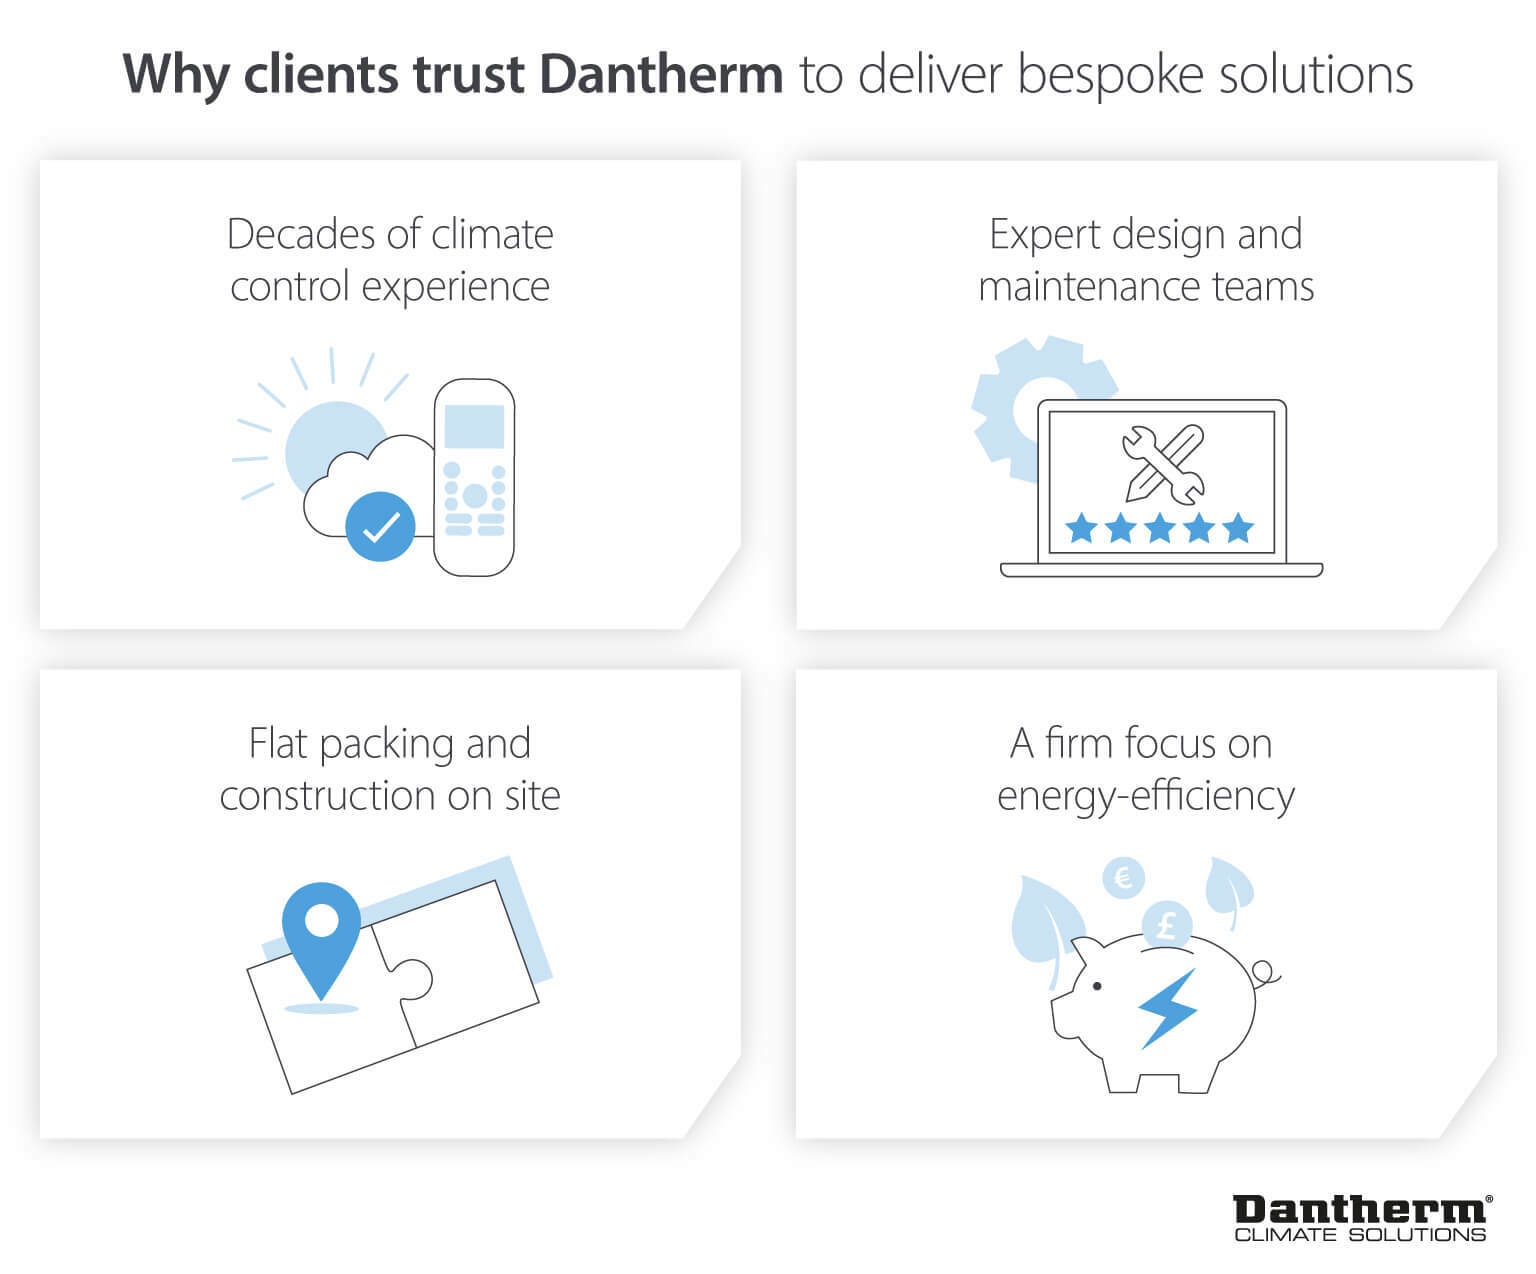 Leisure centre bespoke commercial solutions and why client trust Dantherm for climate control expertise and equipment